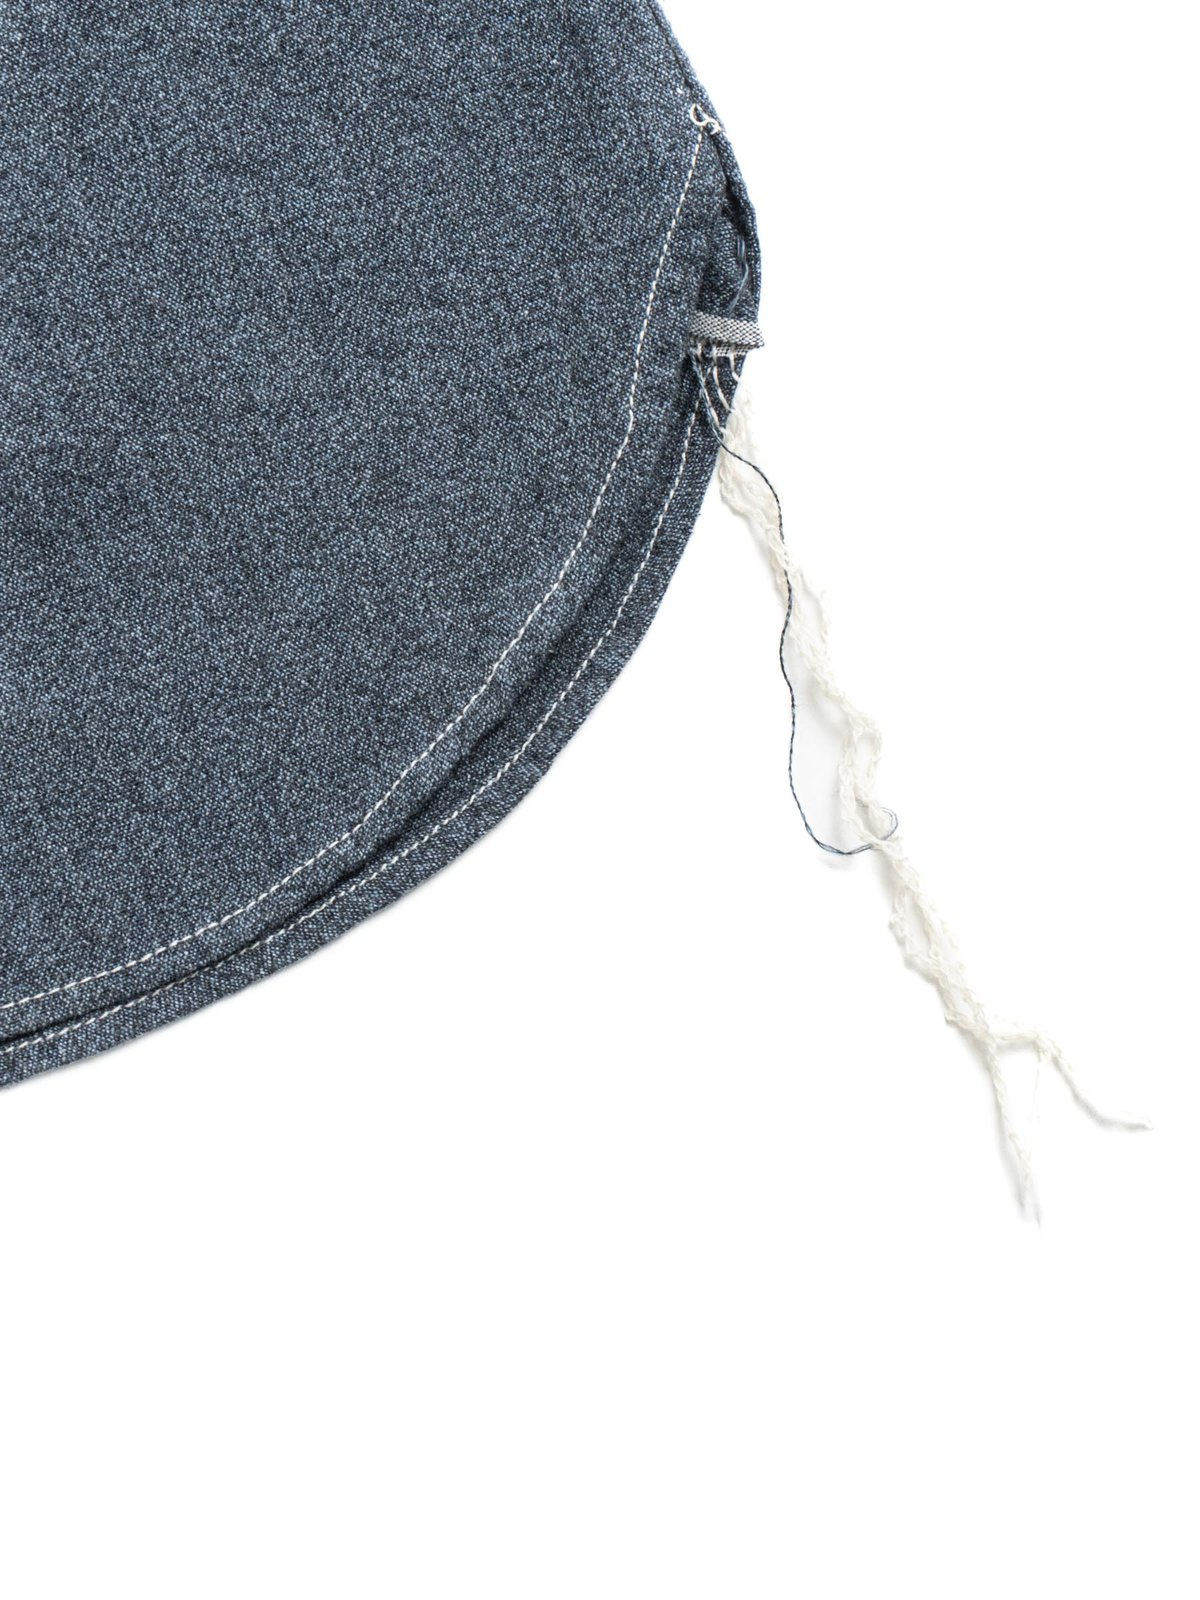 SJCBS23 TWISTED HEATHER SELVEDGE CHAMBRAY NAVY - Image 4